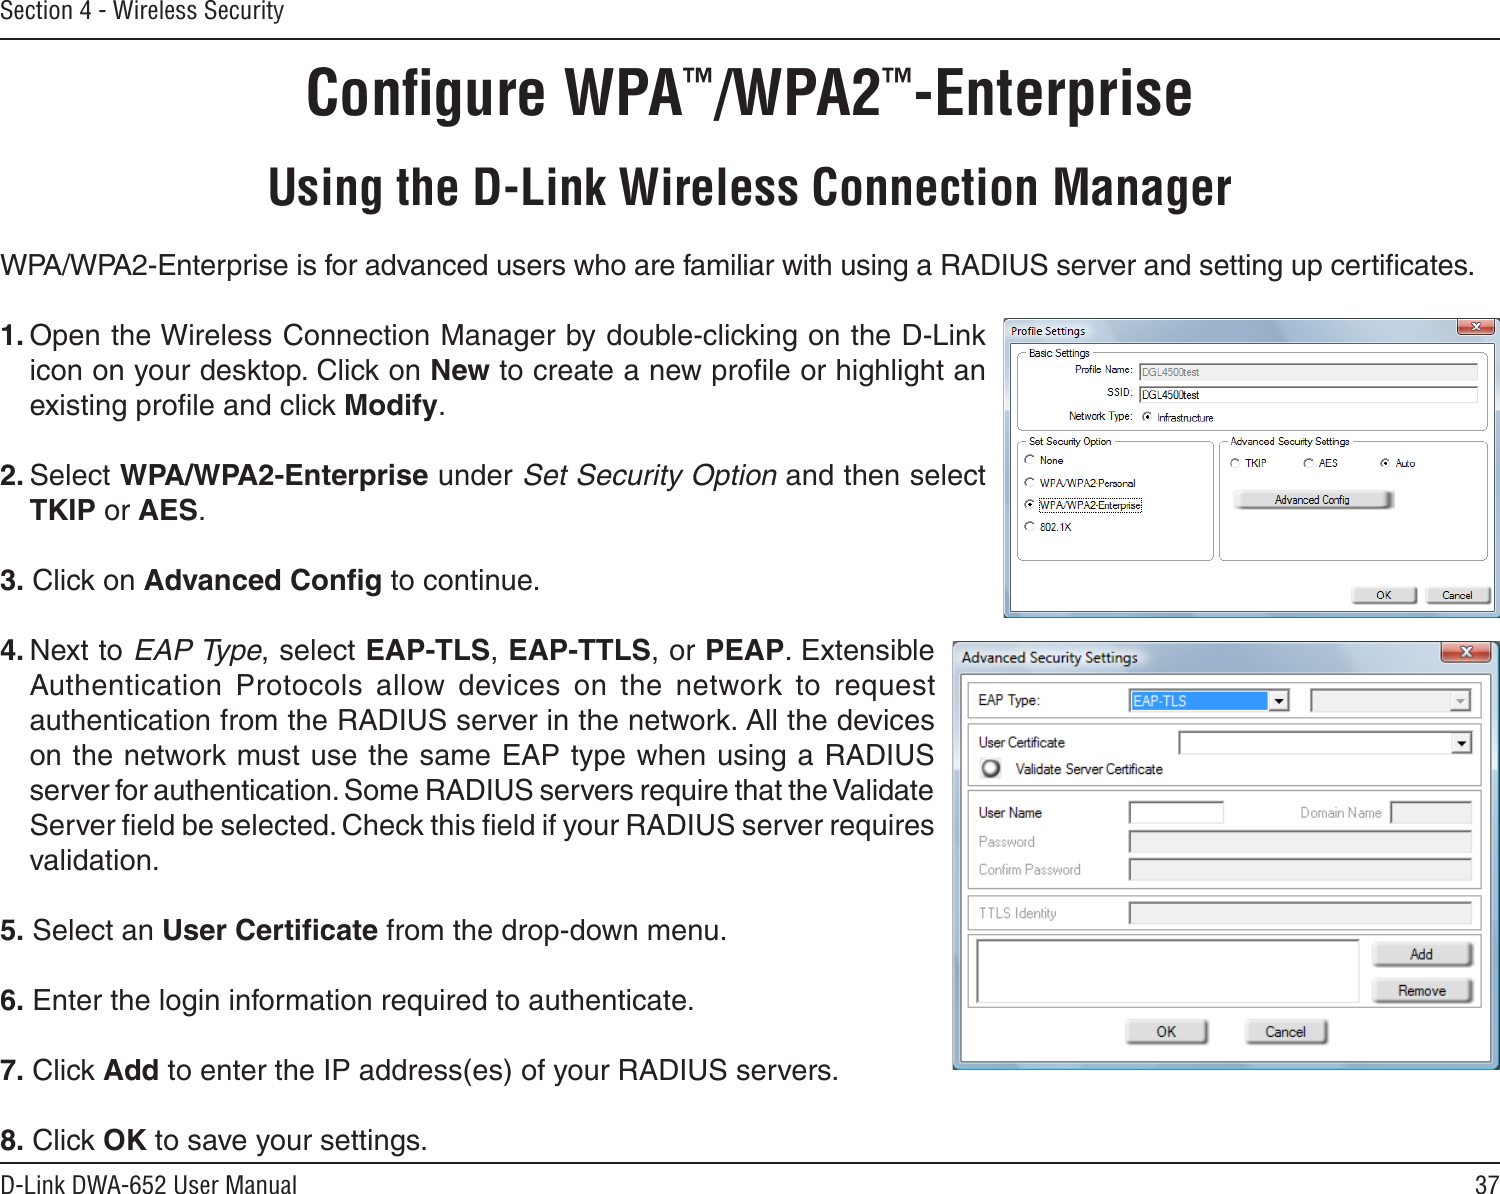 37D-Link DWA-652 User ManualSection 4 - Wireless SecurityConﬁgure WPA™/WPA2™-EnterpriseUsing the D-Link Wireless Connection ManagerWPA/WPA2-Enterprise is for advanced users who are familiar with using a RADIUS server and setting up certiﬁcates.1. Open the Wireless Connection Manager by double-clicking on the D-Link icon on your desktop. Click on New to create a new proﬁle or highlight an existing proﬁle and click Modify. 2. Select WPA/WPA2-Enterprise under Set Security Option and then select TKIP or AES.3. Click on Advanced Conﬁg to continue.4. Next to EAP Type, select EAP-TLS, EAP-TTLS, or PEAP. Extensible Authentication  Protocols  allow  devices  on  the  network  to  request authentication from the RADIUS server in the network. All the devices on the network must use the same EAP type when using a RADIUS server for authentication. Some RADIUS servers require that the Validate Server ﬁeld be selected. Check this ﬁeld if your RADIUS server requires validation.5. Select an User Certiﬁcate from the drop-down menu.6. Enter the login information required to authenticate.7. Click Add to enter the IP address(es) of your RADIUS servers.8. Click OK to save your settings.